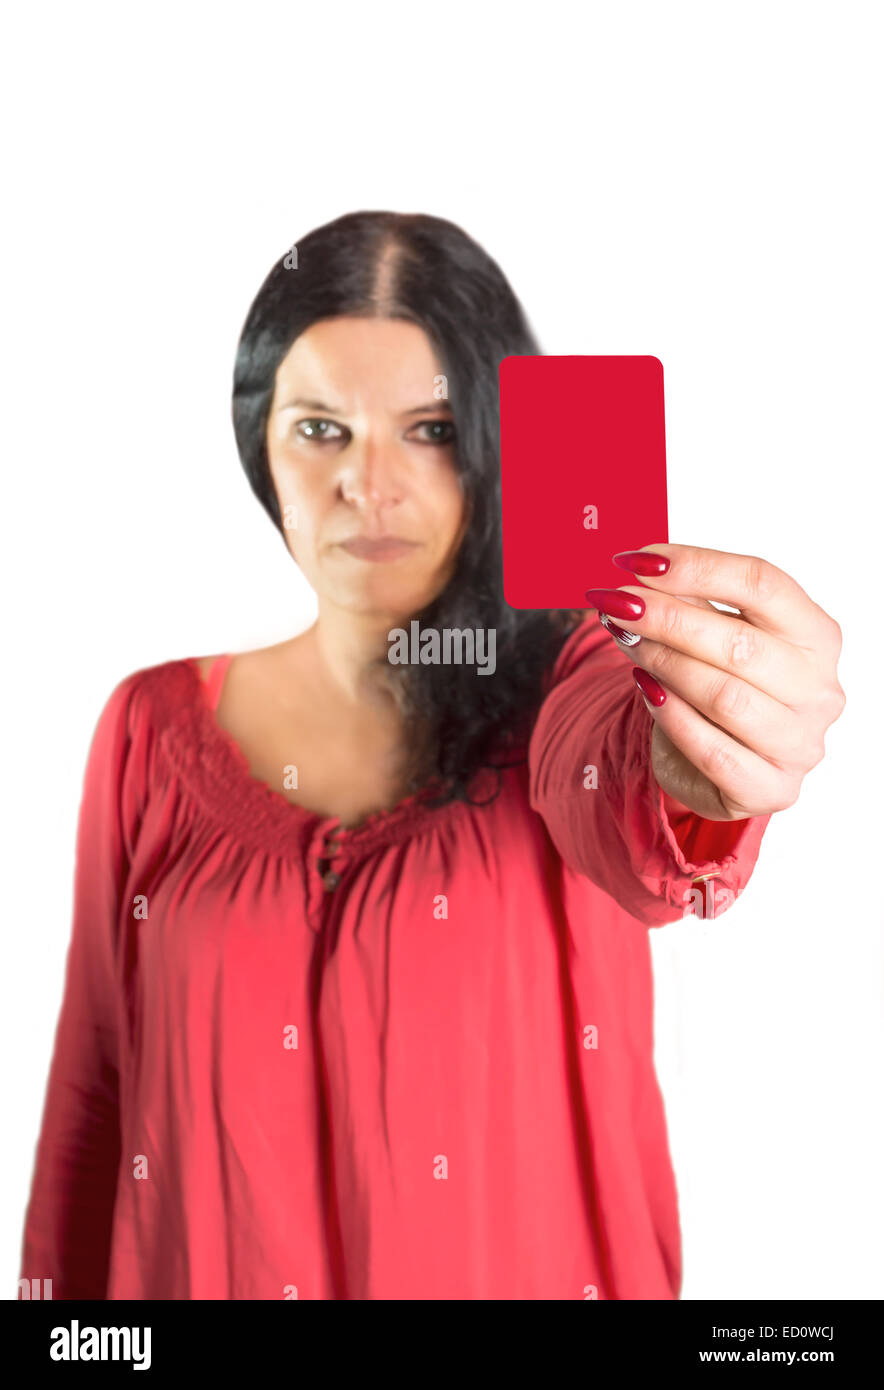 Red card Stock Photo by ©olly18 5752673